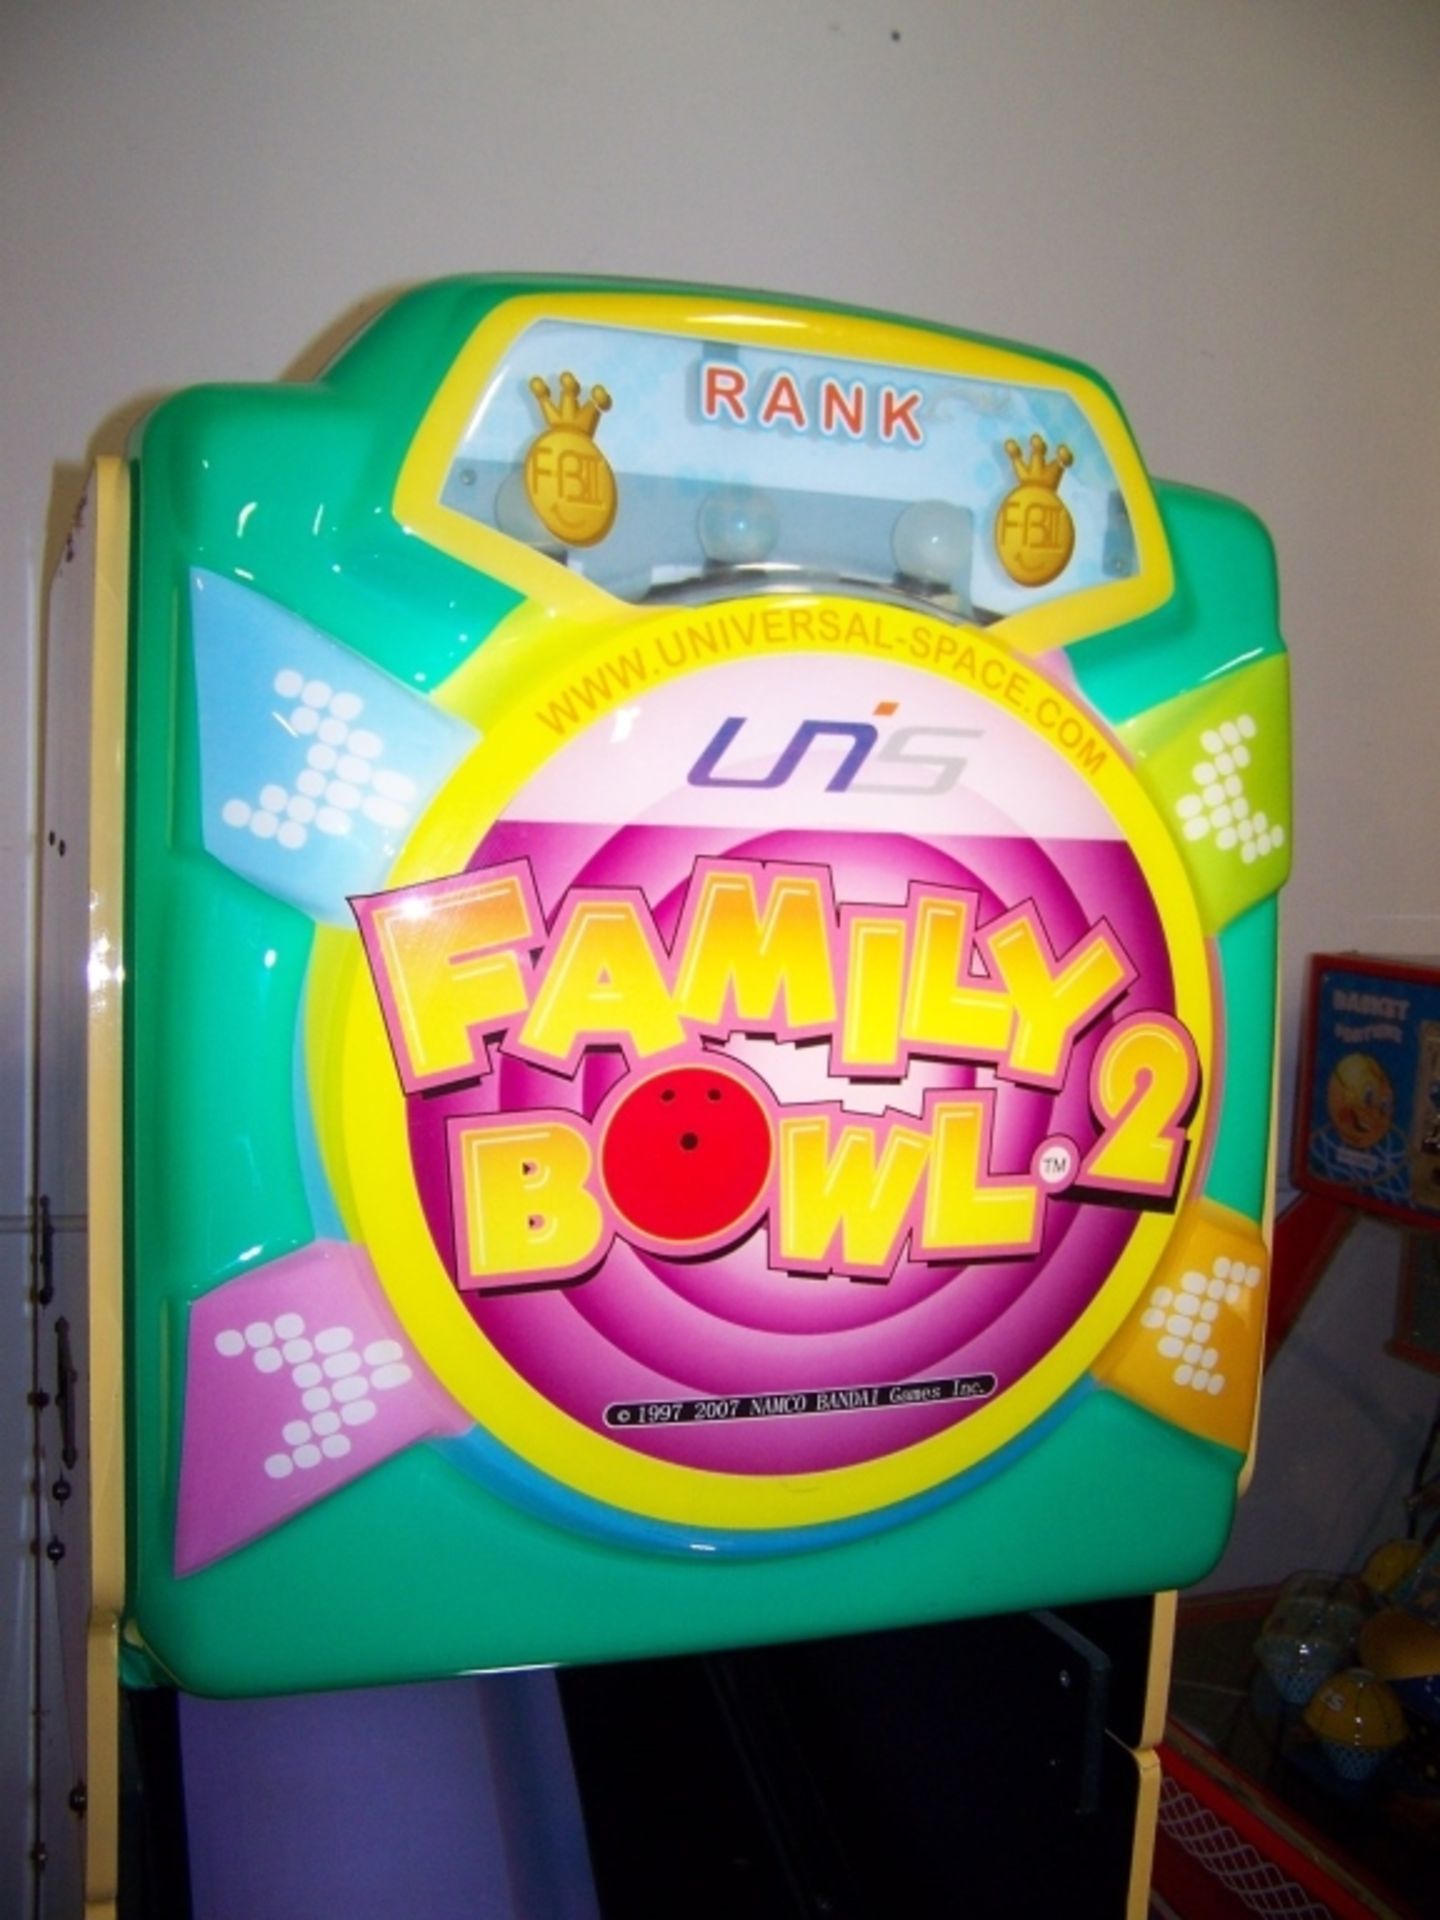 FAMILY BOWL 2 TICKET REDEMPTION GAME NAMCO - Image 6 of 6